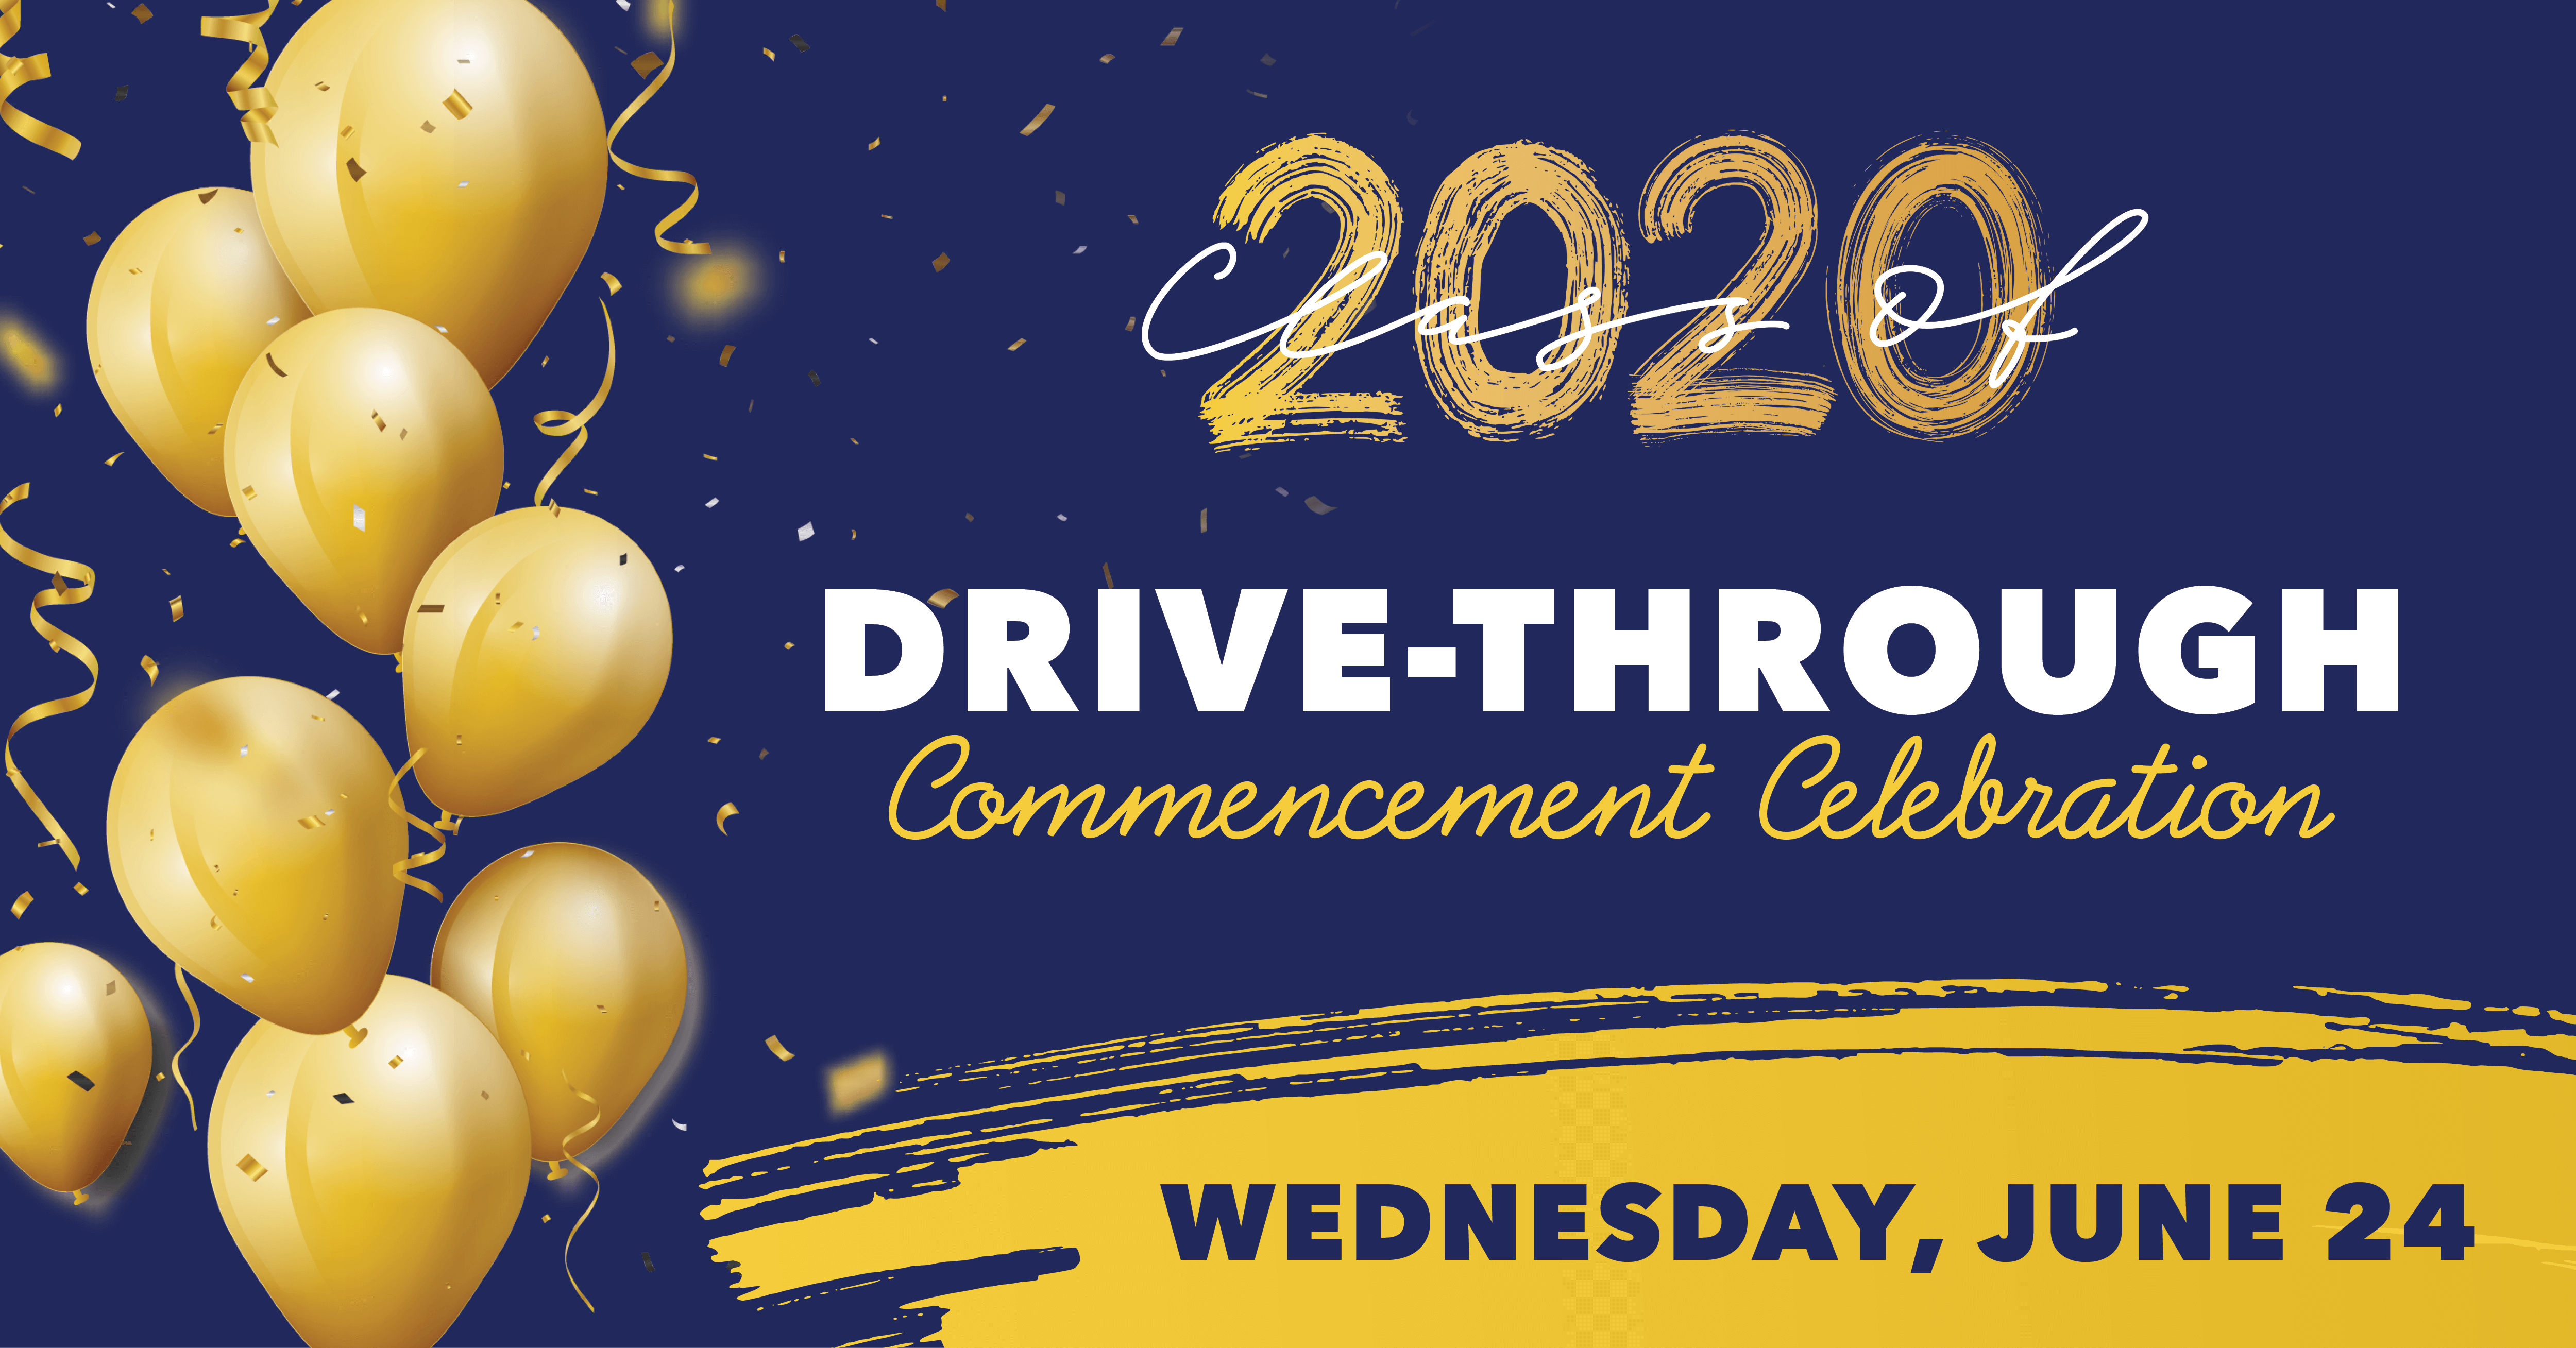 Drive-Through Commencement Event Image